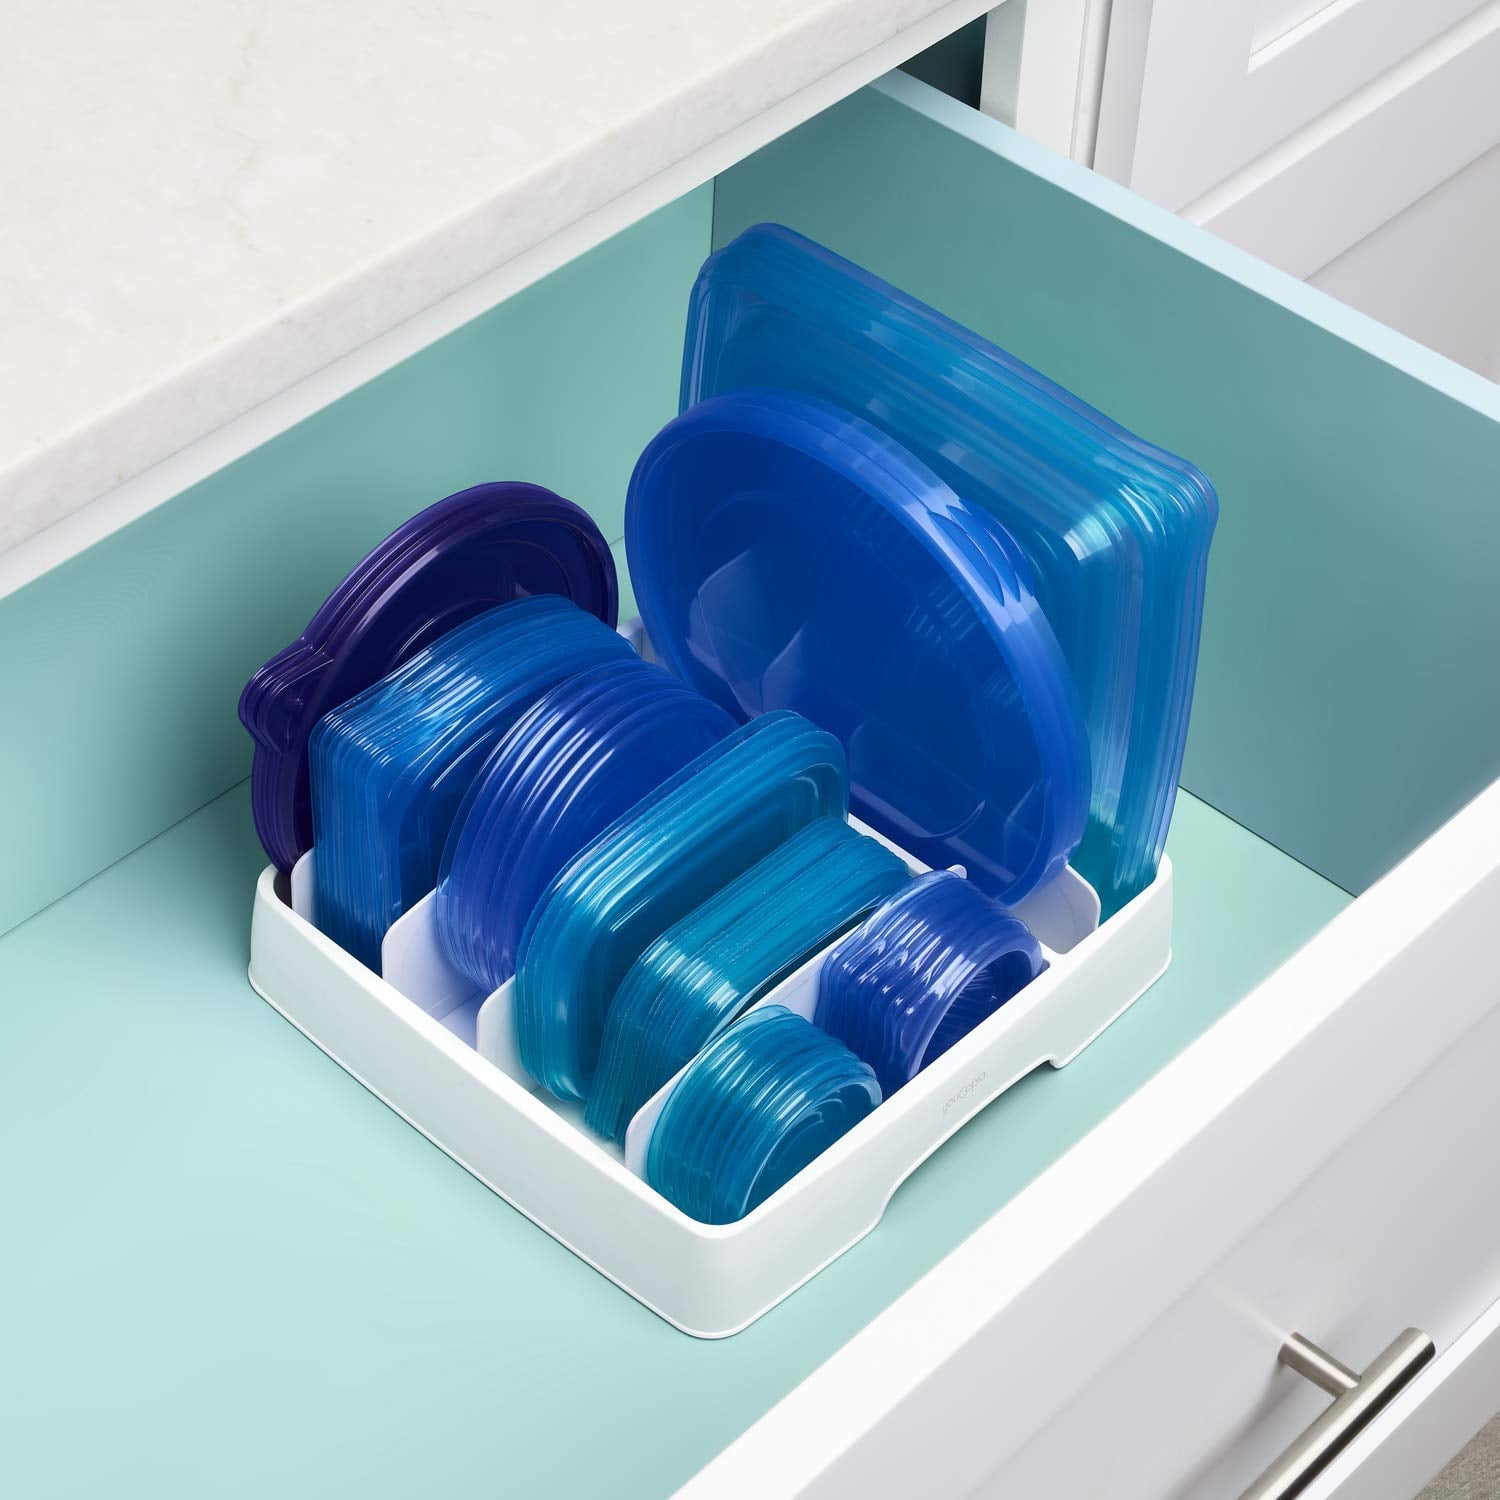 Best Food Container Lid Organizer on